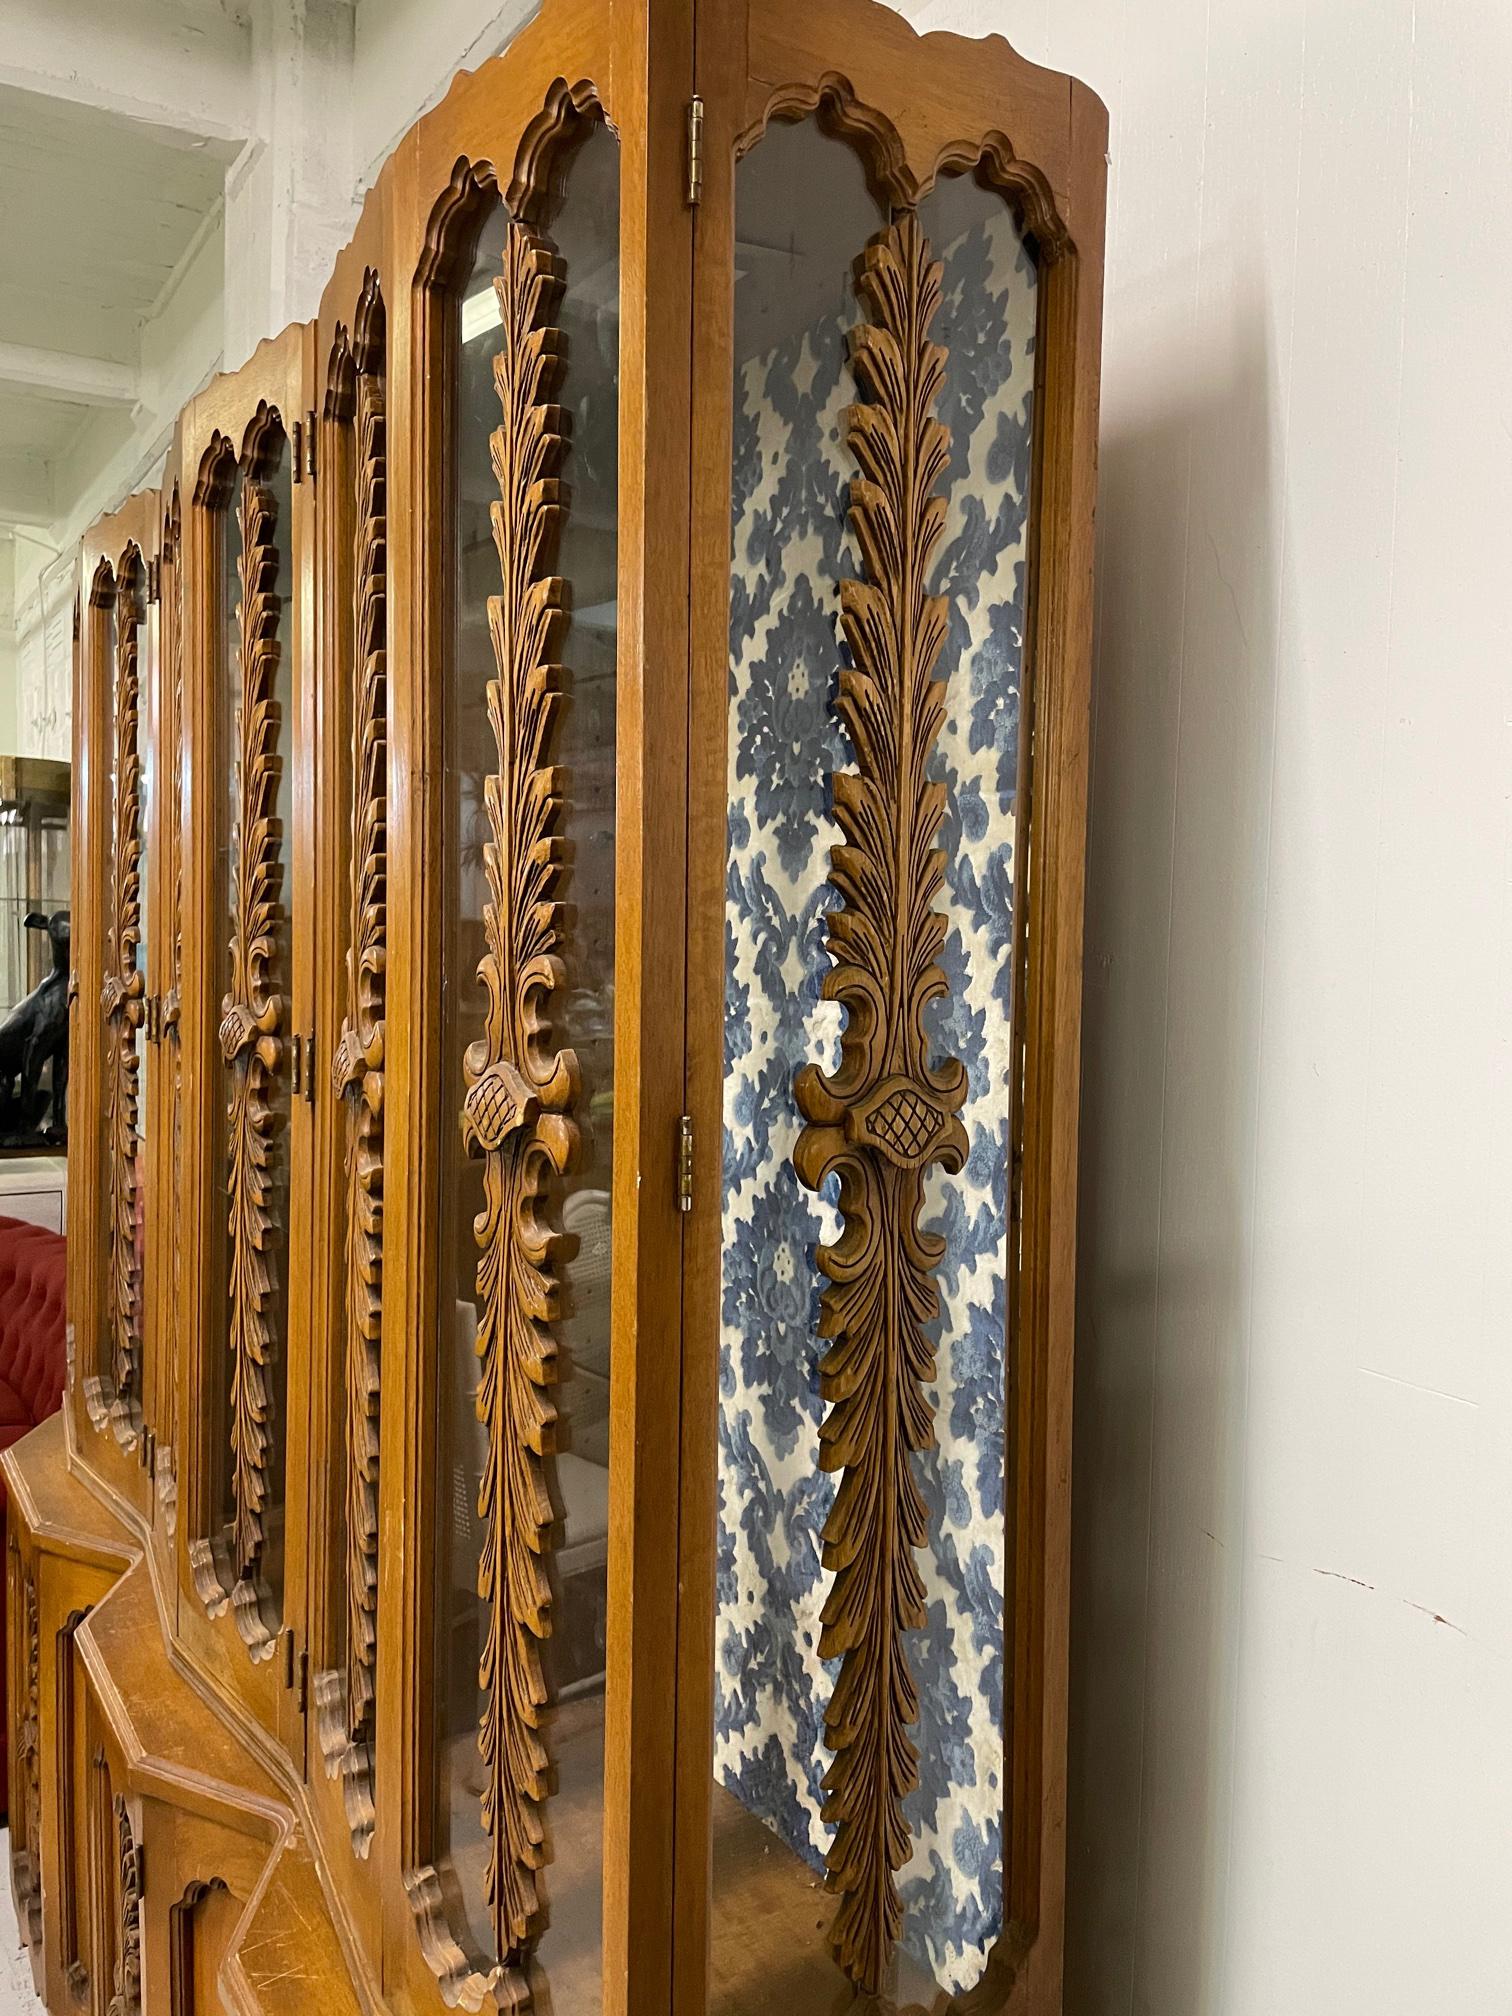 Vintage display cabinet features hand carved detailing in an acanthus leaf motif. Good vintage condition with imperfections consistent with age, see photos for condition details.
For a shipping quote to your exact zip code, please message us.
